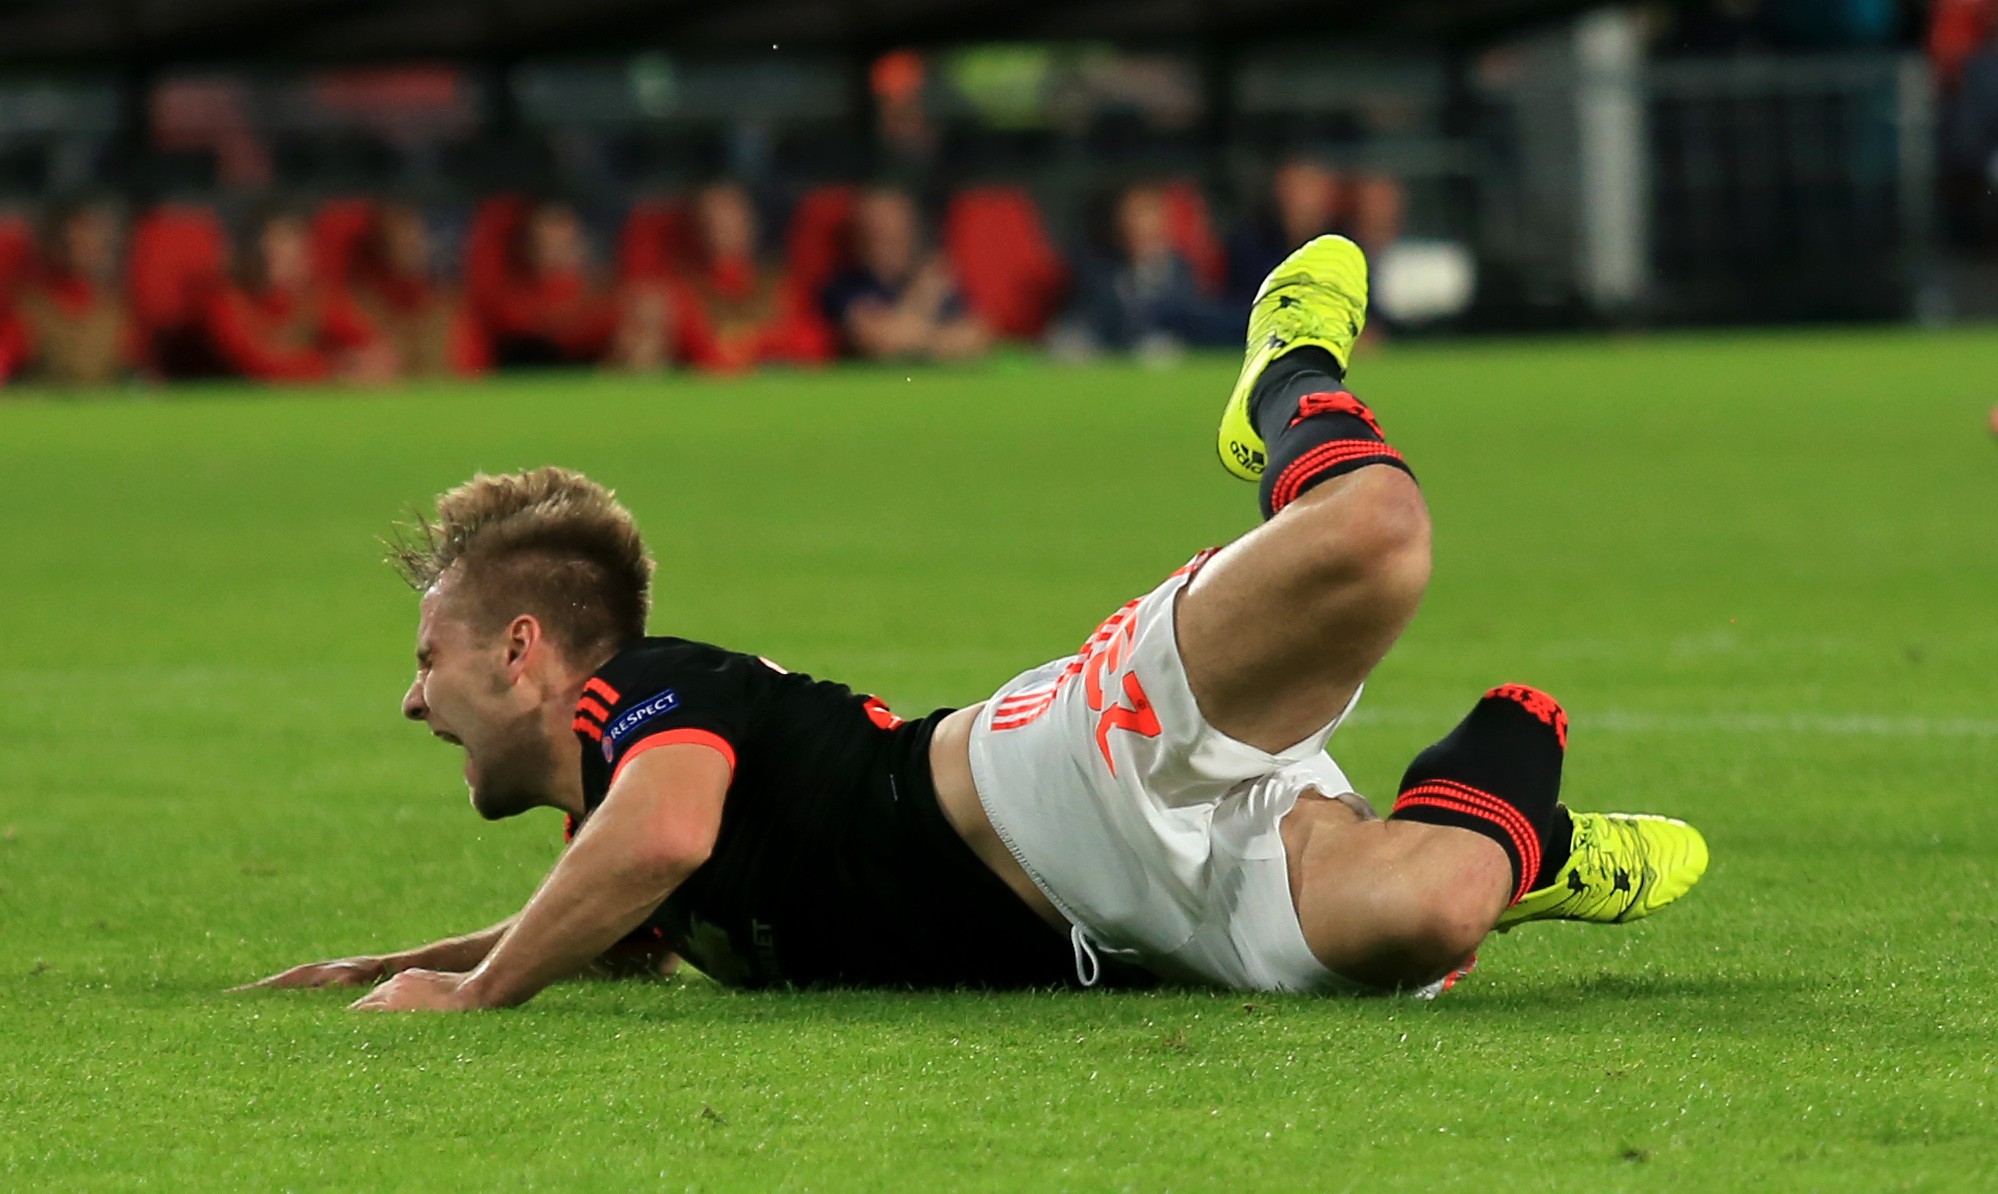 Luke Shaw needed surgery after this double leg break